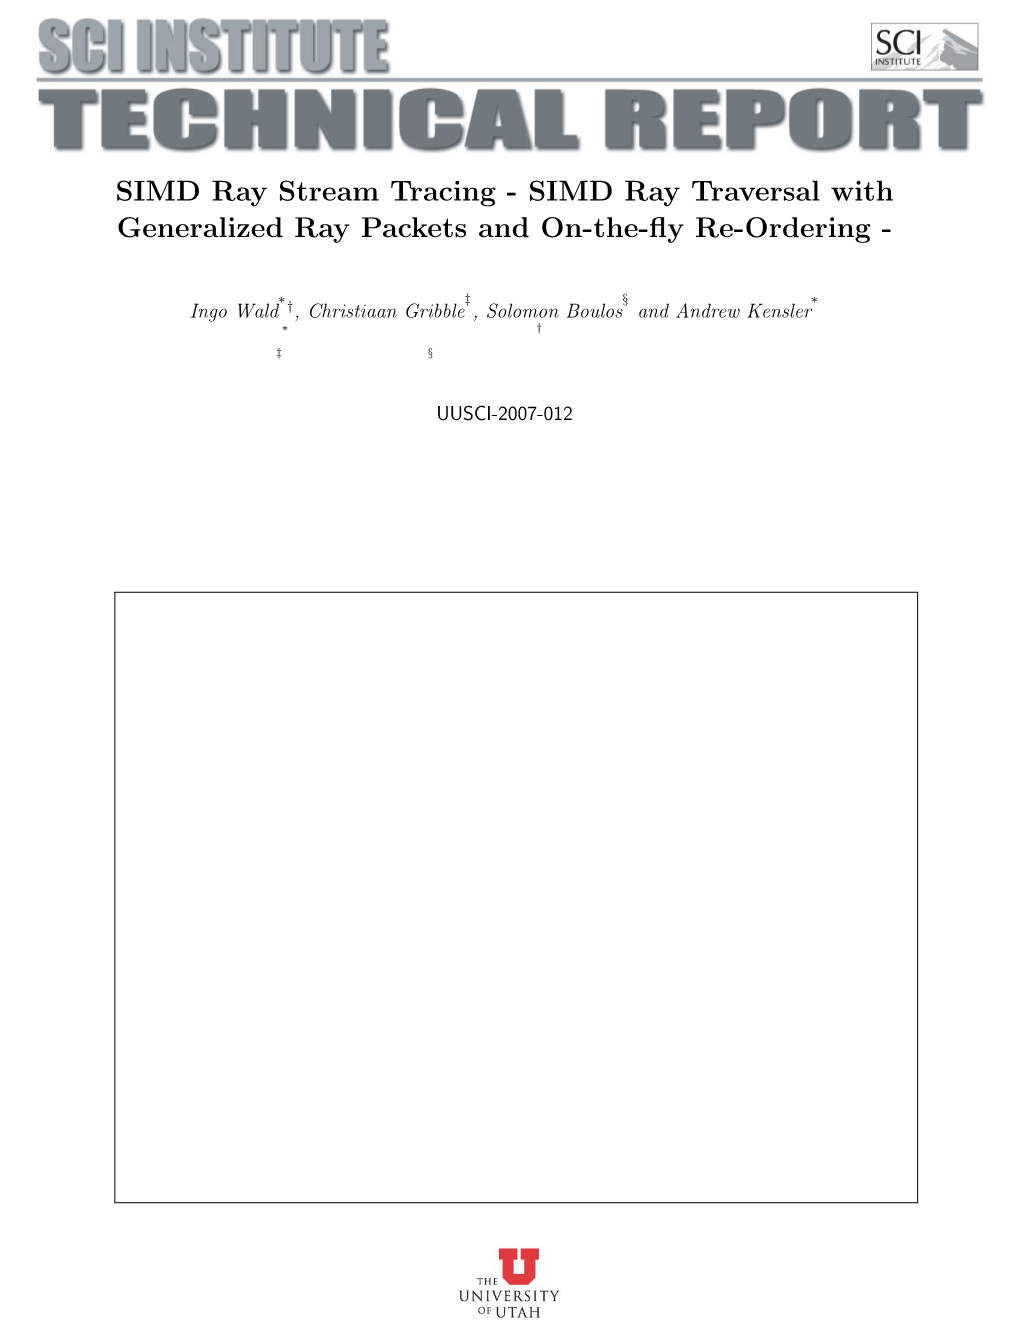 SIMD Ray Traversal with Generalized Ray Packets and On-The-Fly Re